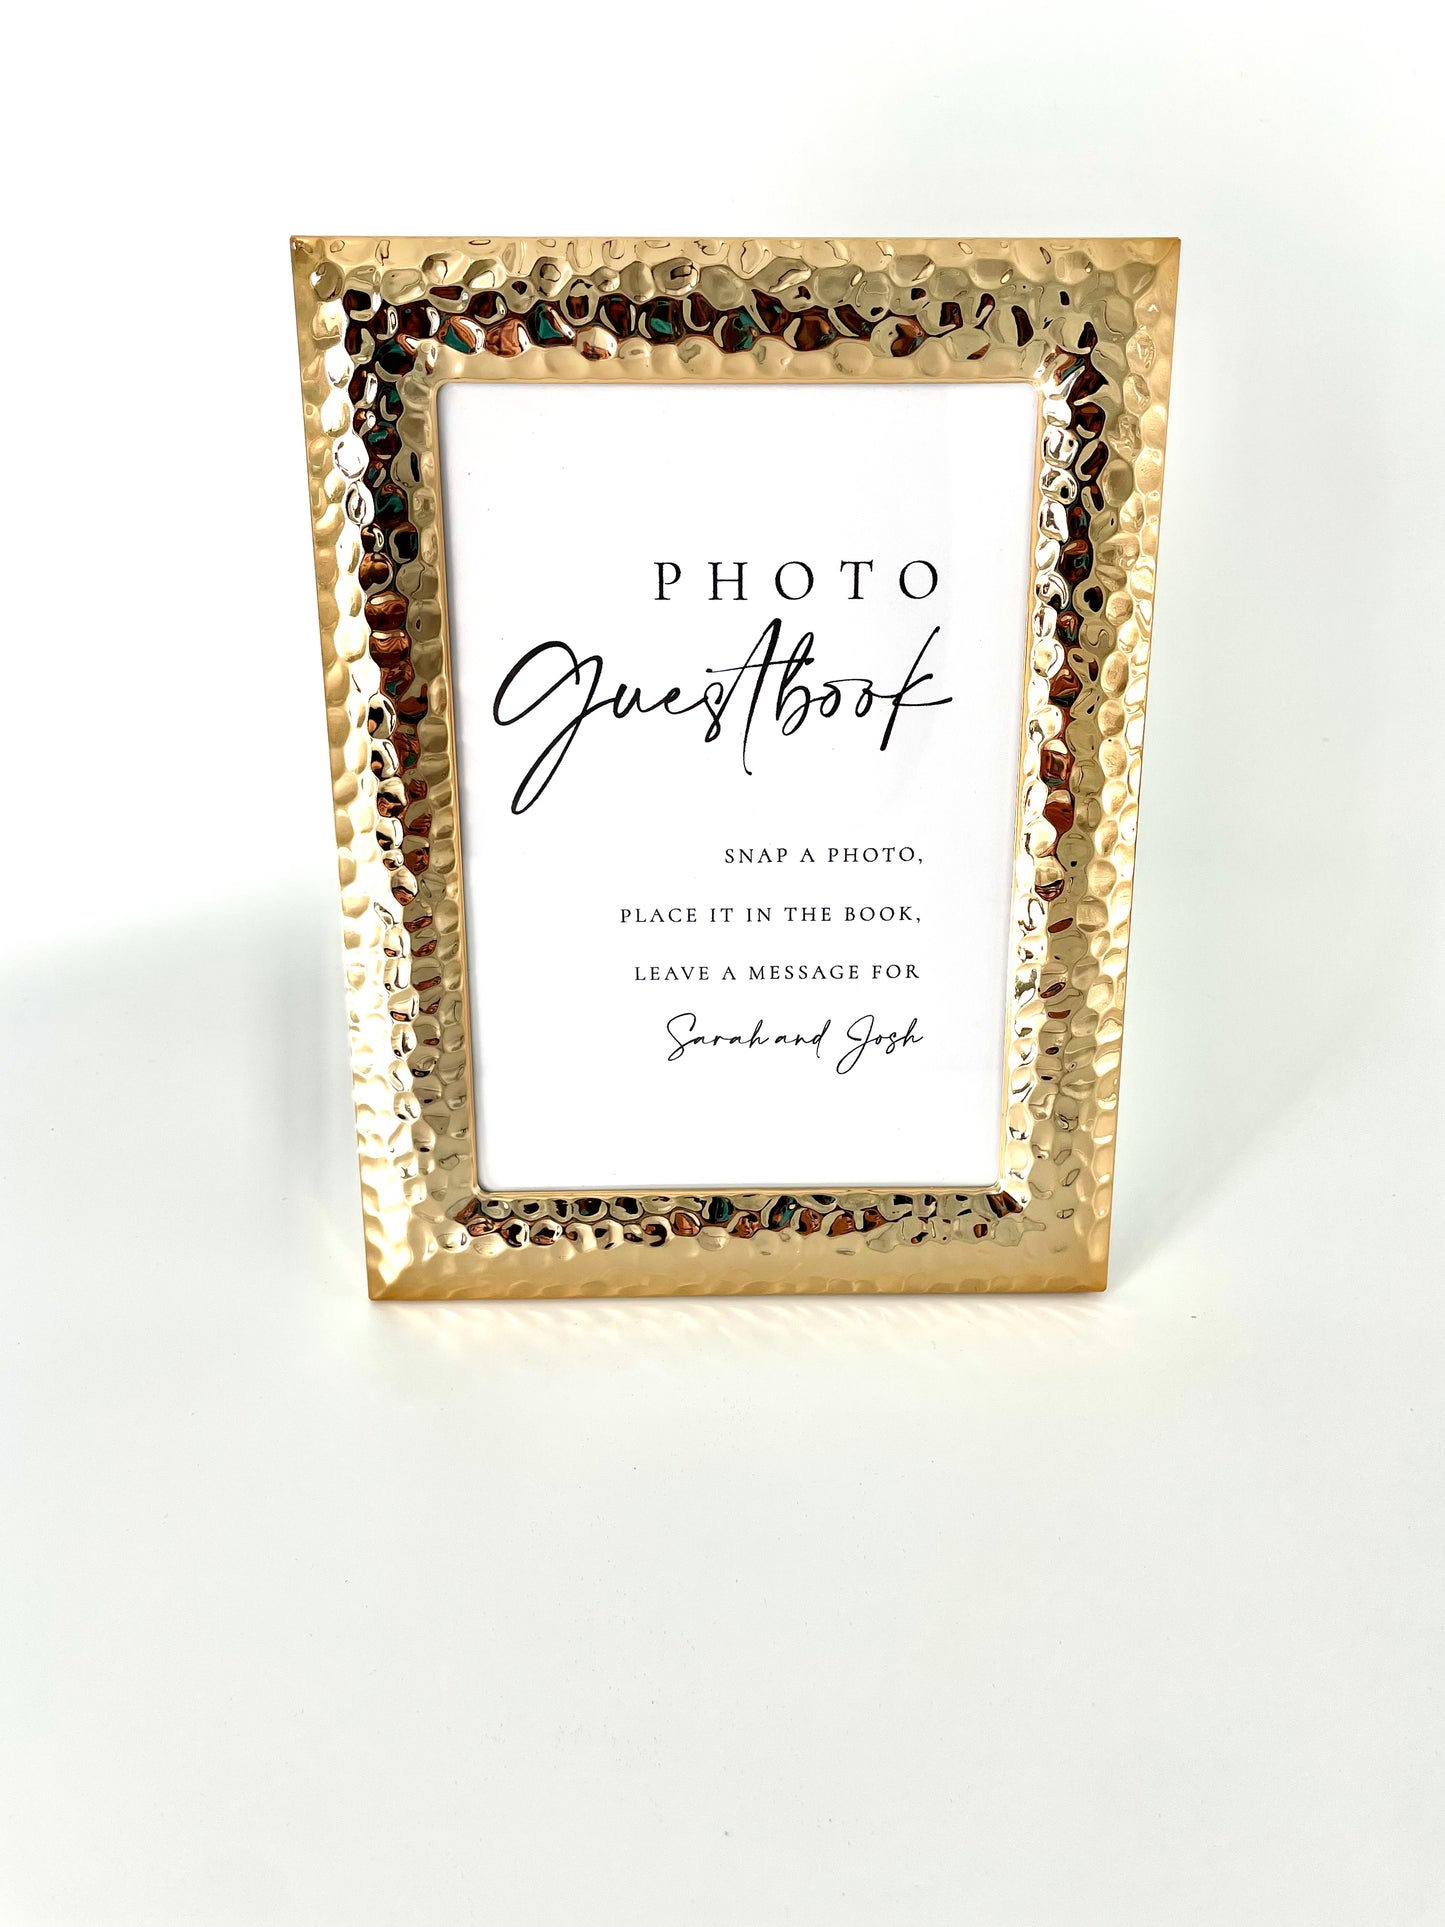 Photo Guestbook sign - Customizable